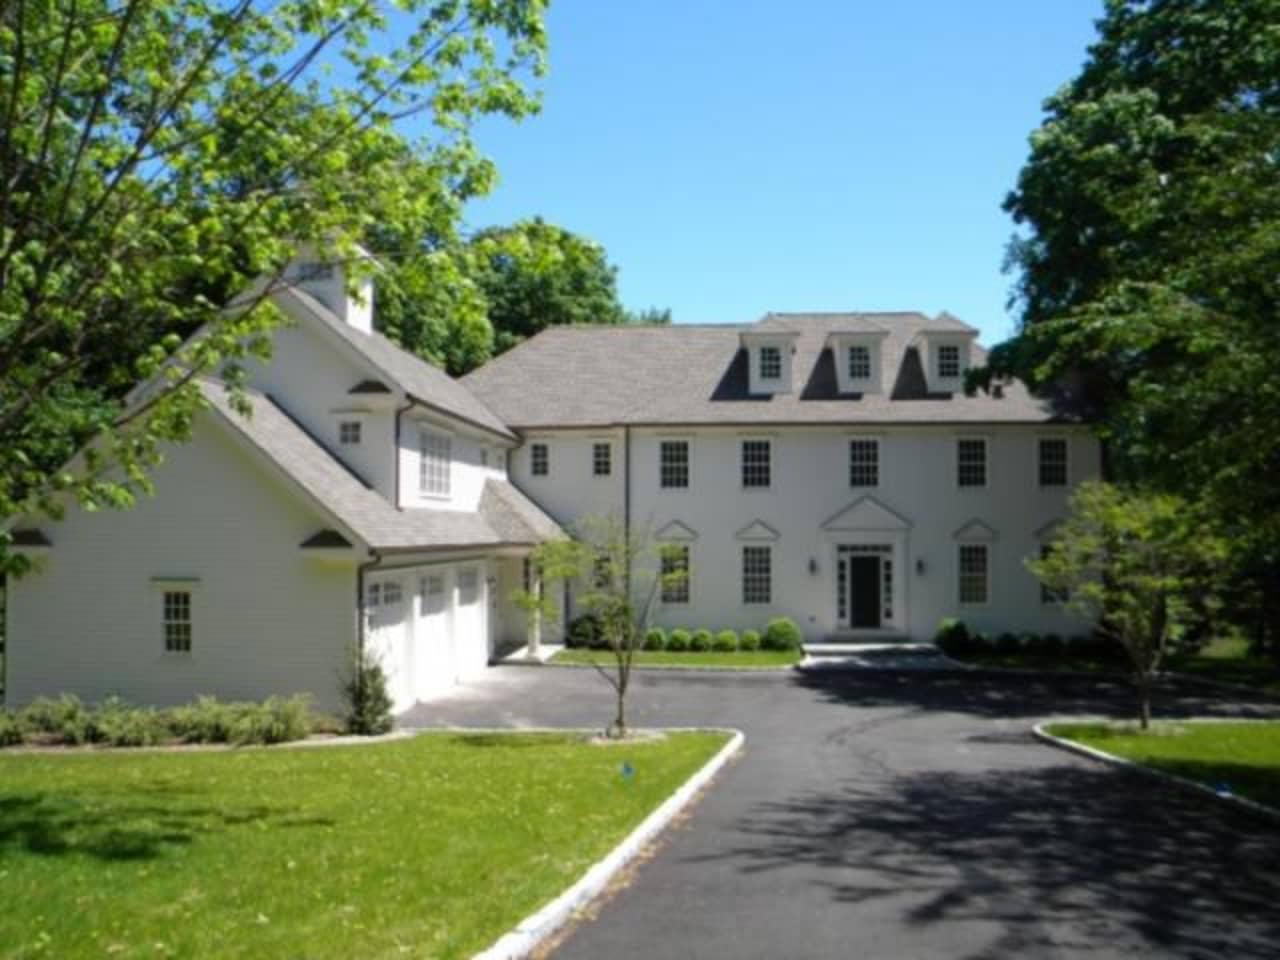 This New Canaan home at 440 Carter St., was sold for $2.4 million recently. 